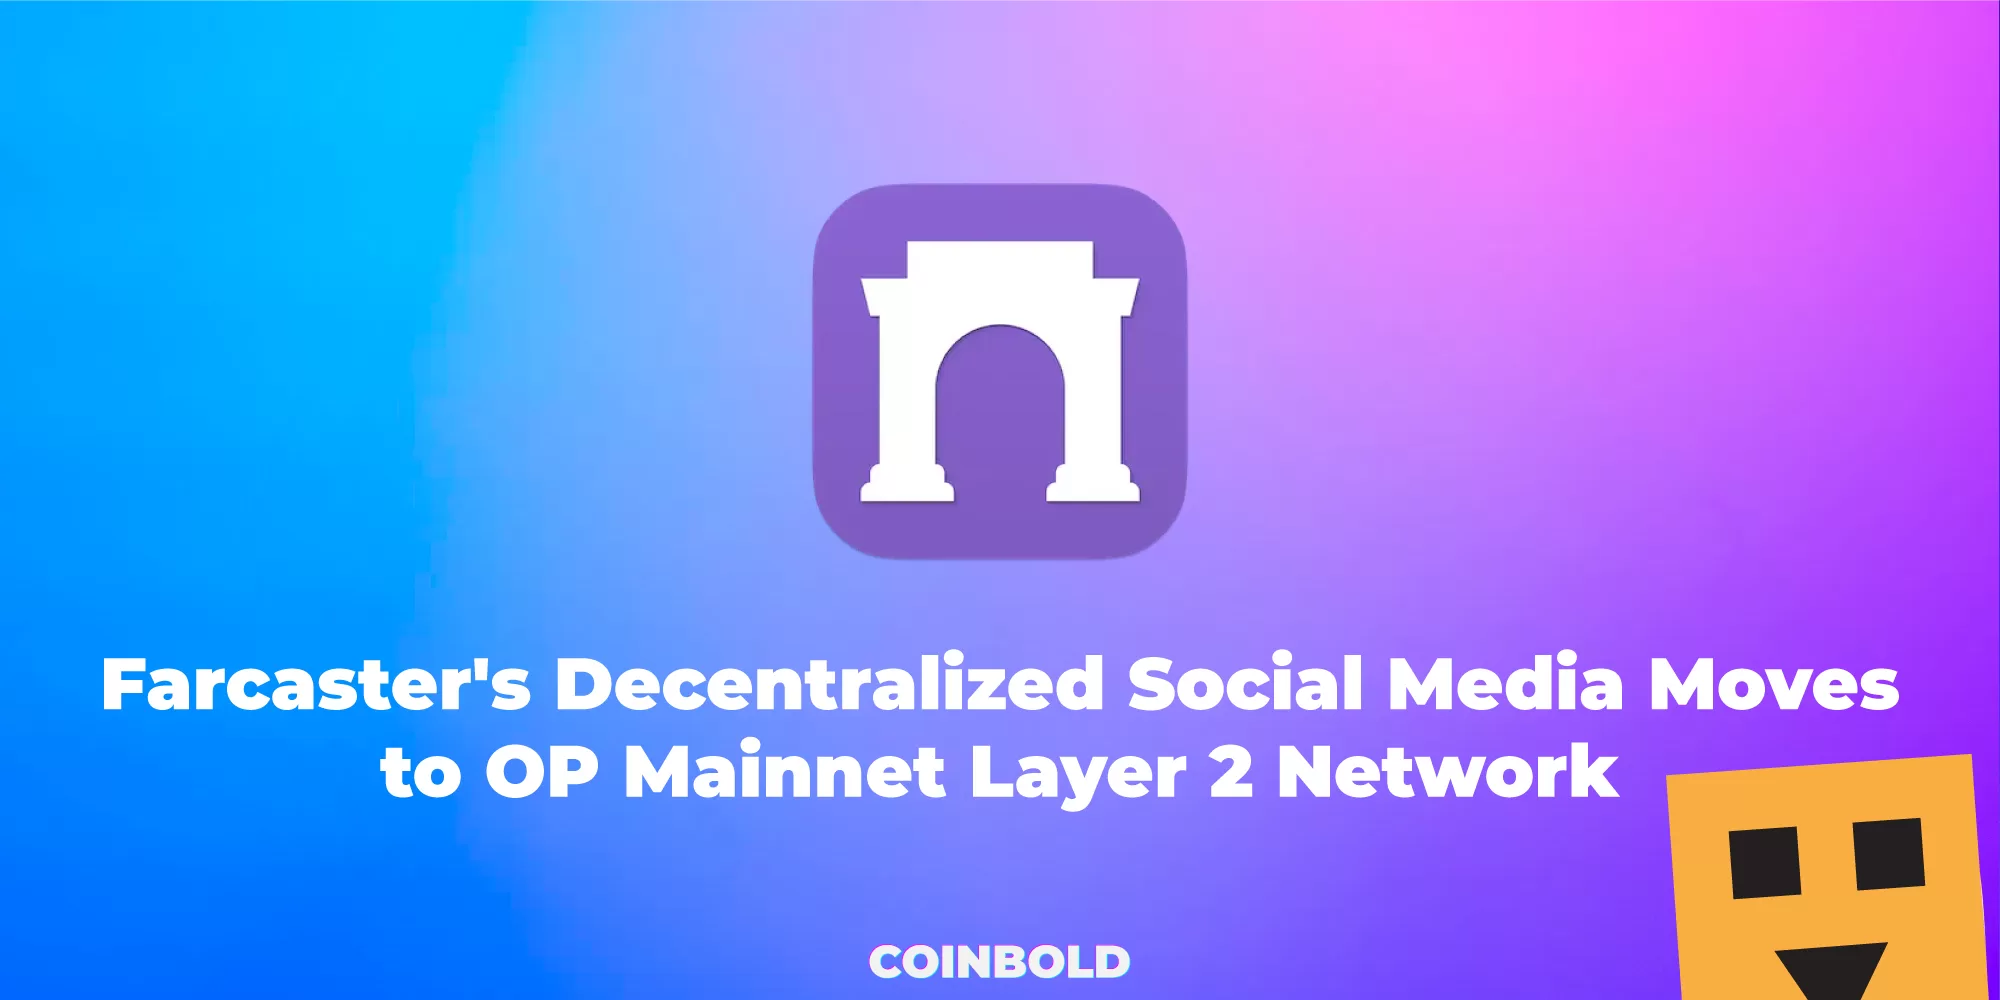 Farcaster's Decentralized Social Media Moves to OP Mainnet Layer 2 Network